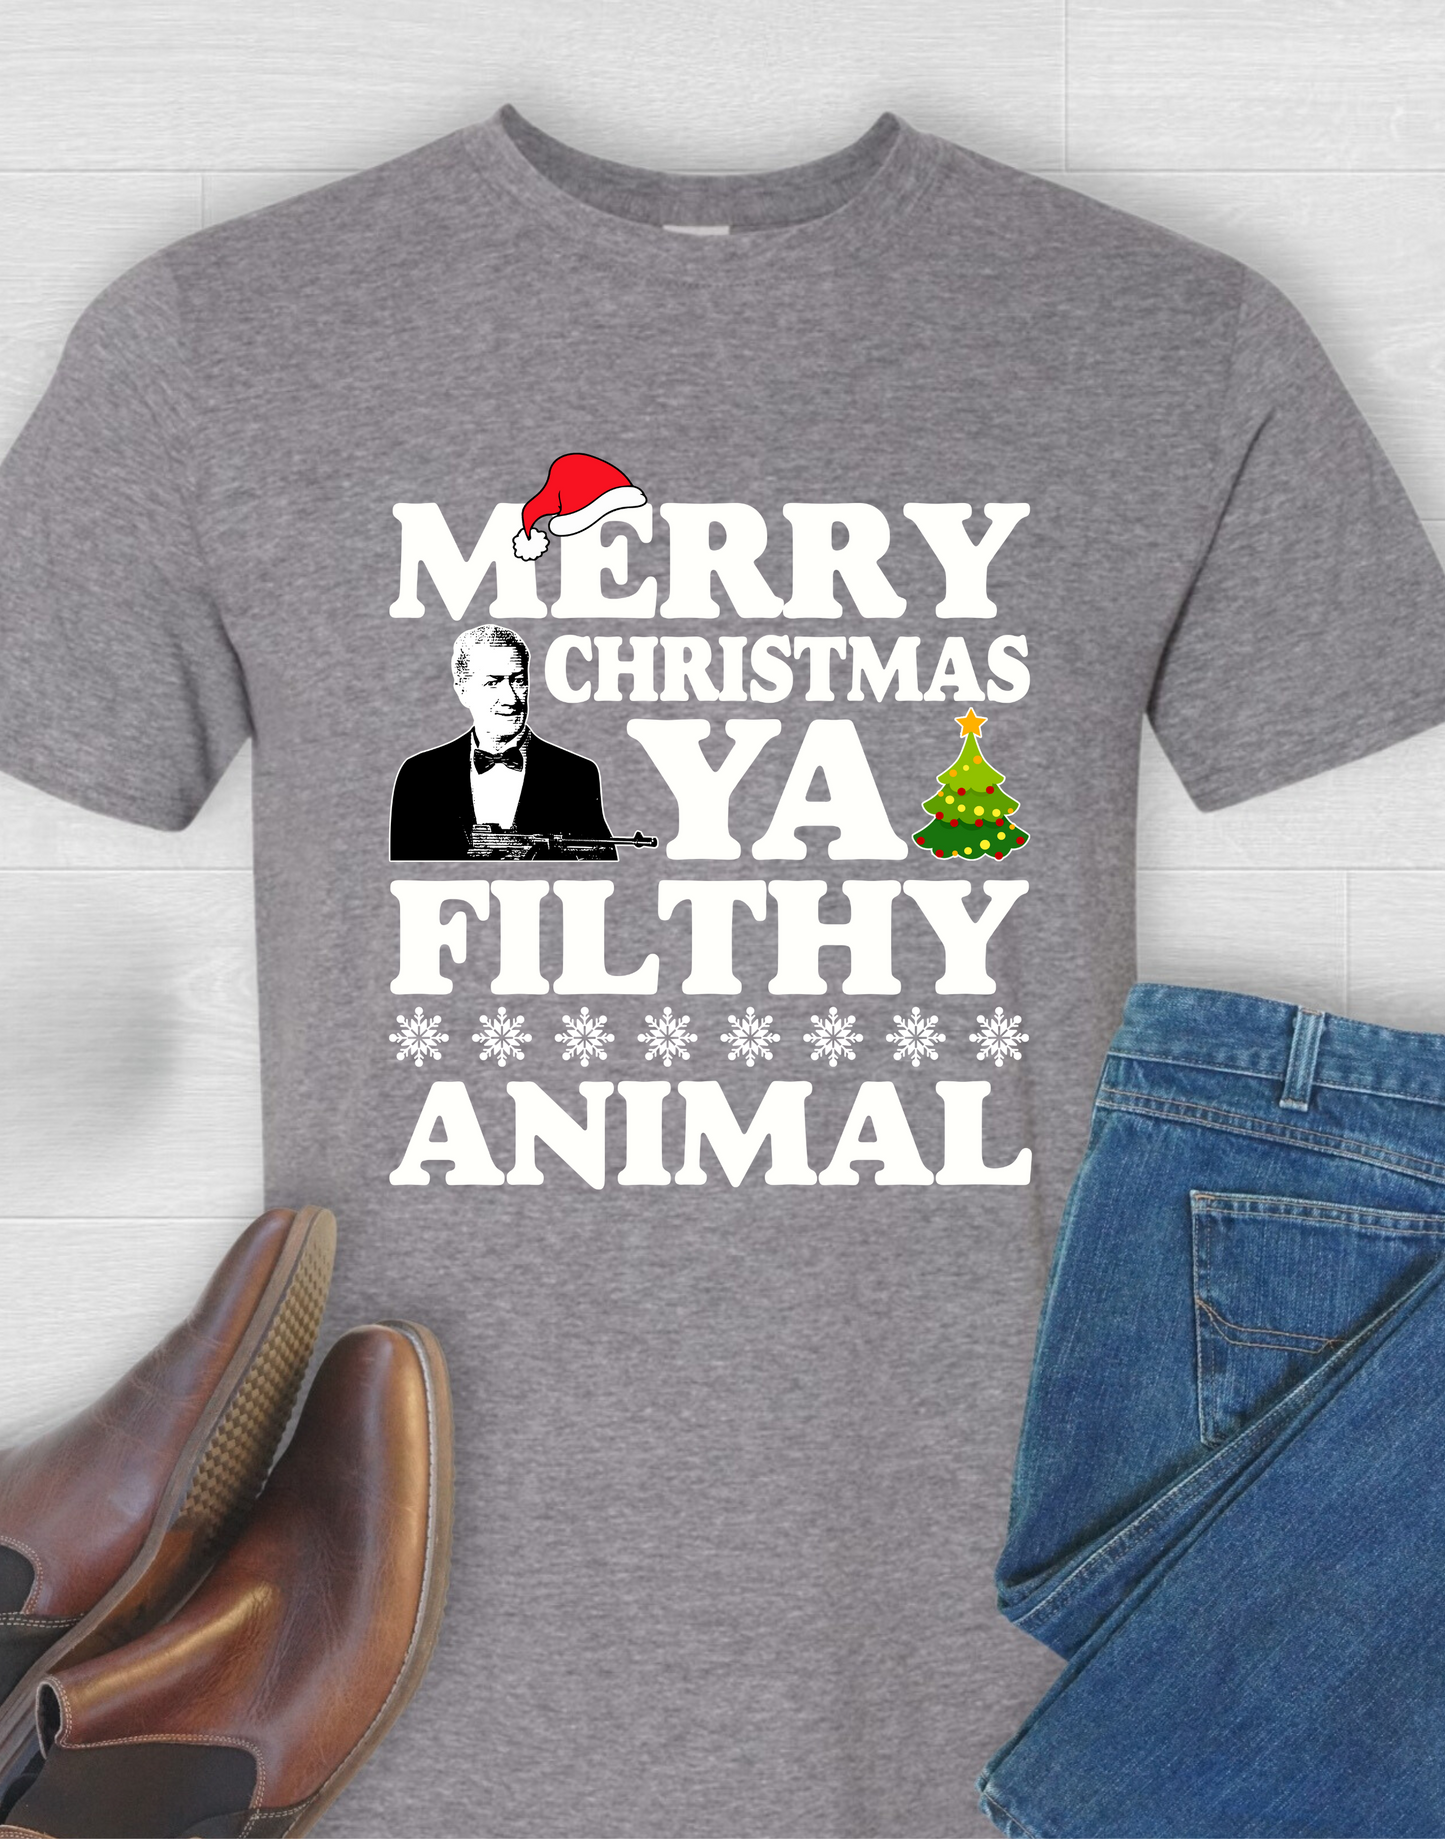 Filthy Animal - Home for the holidays